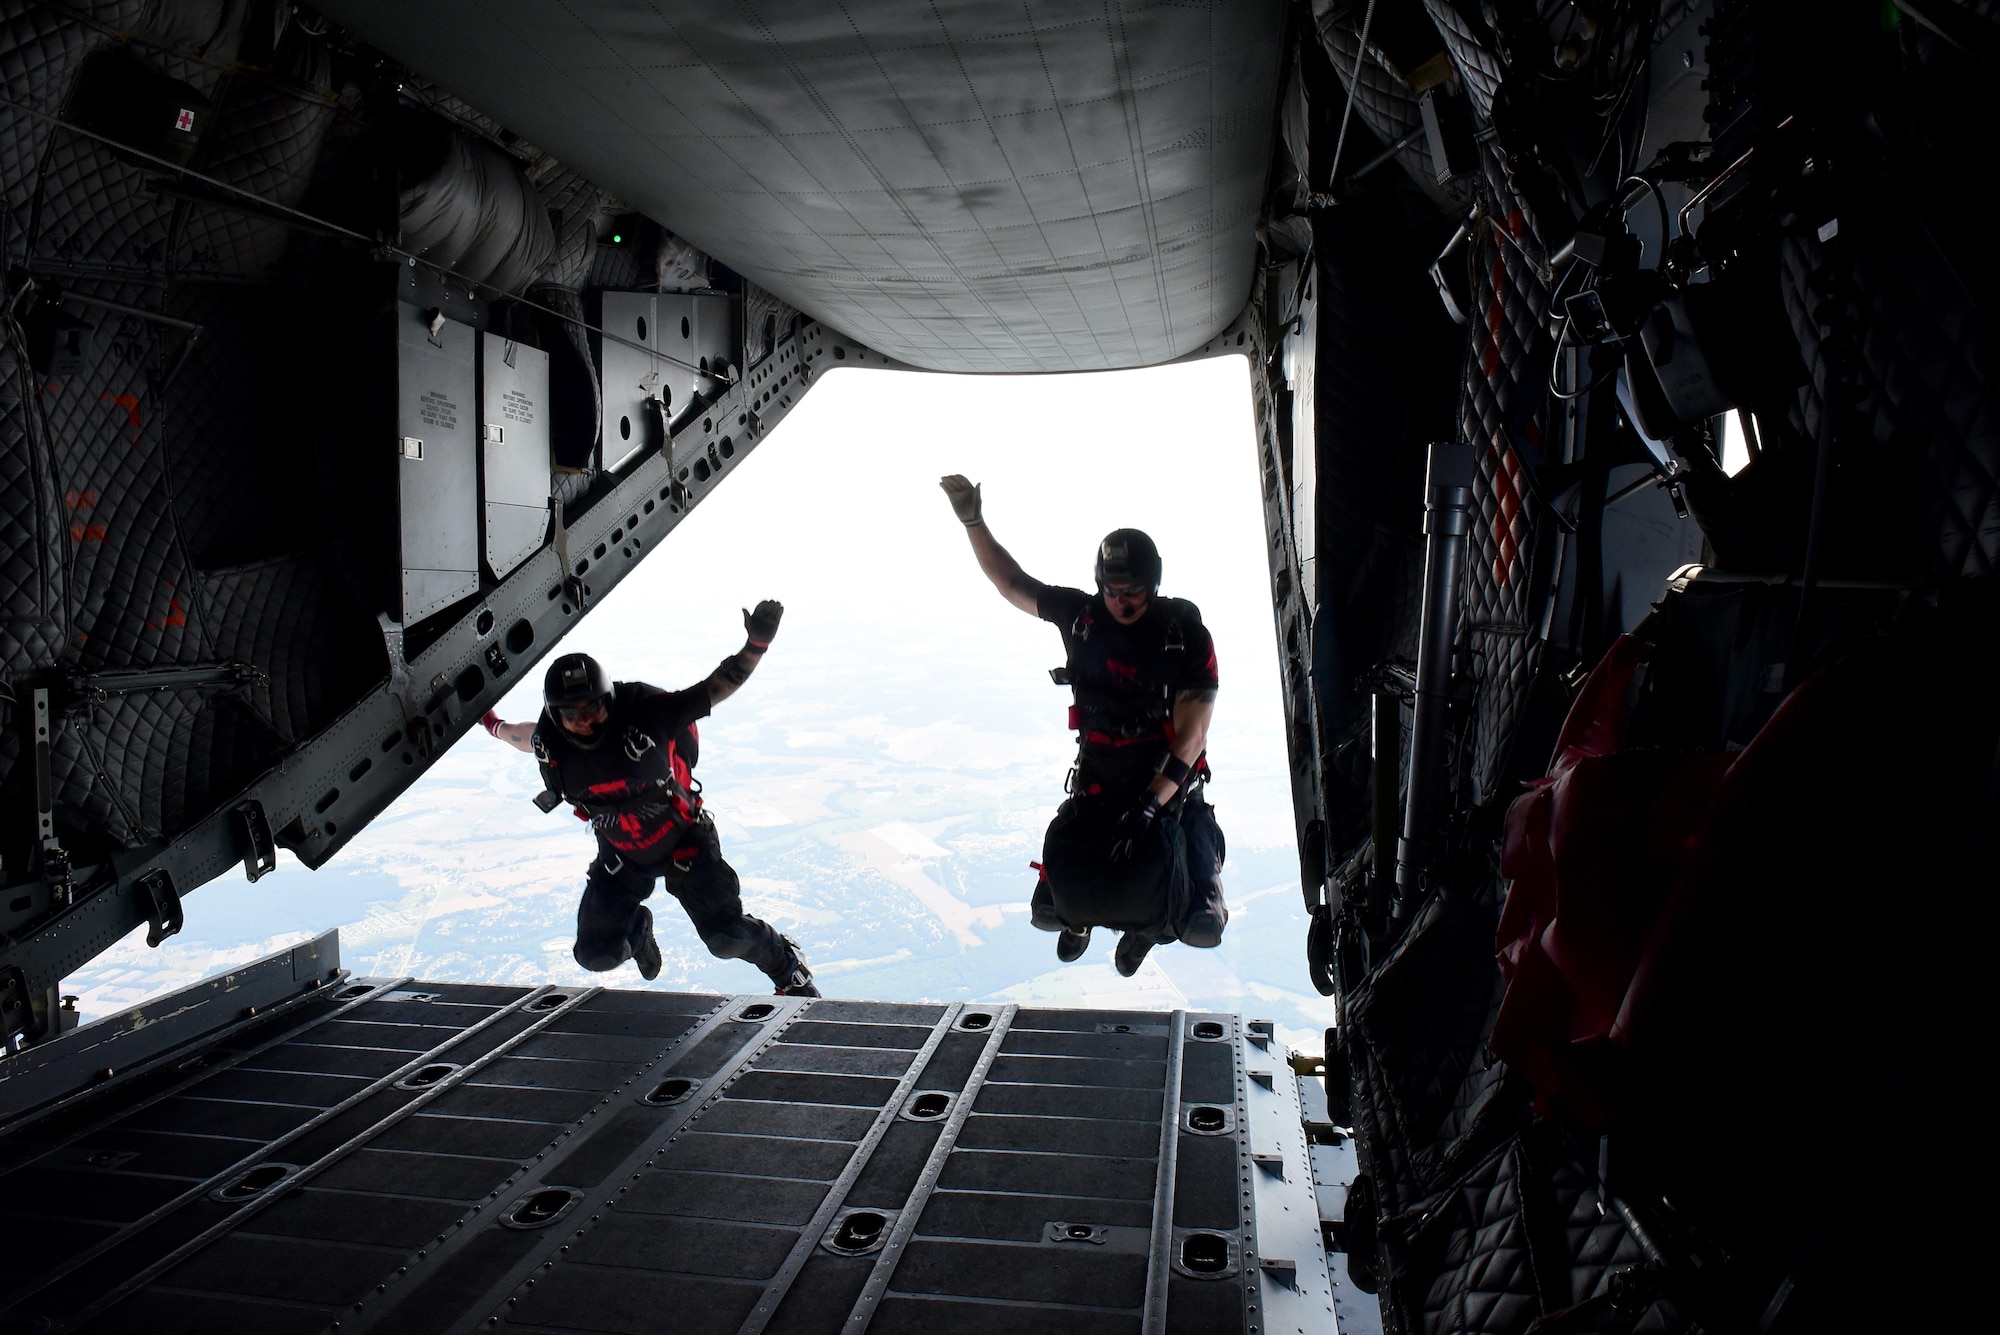 Members of the Black Daggers, the official U.S. Army Special Operations Command Parachute Demonstration Team, jump from an aircraft during the Wings Over Wayne Air Show, May 20, 2017, in the skies over Seymour Johnson Air Force Base, North Carolina. The 4th Fighter Wing at Seymour Johnson AFB will celebrate their 75th anniversary in September 2017. (U.S. Air Force photo by Airman 1st Class Kenneth Boyton)